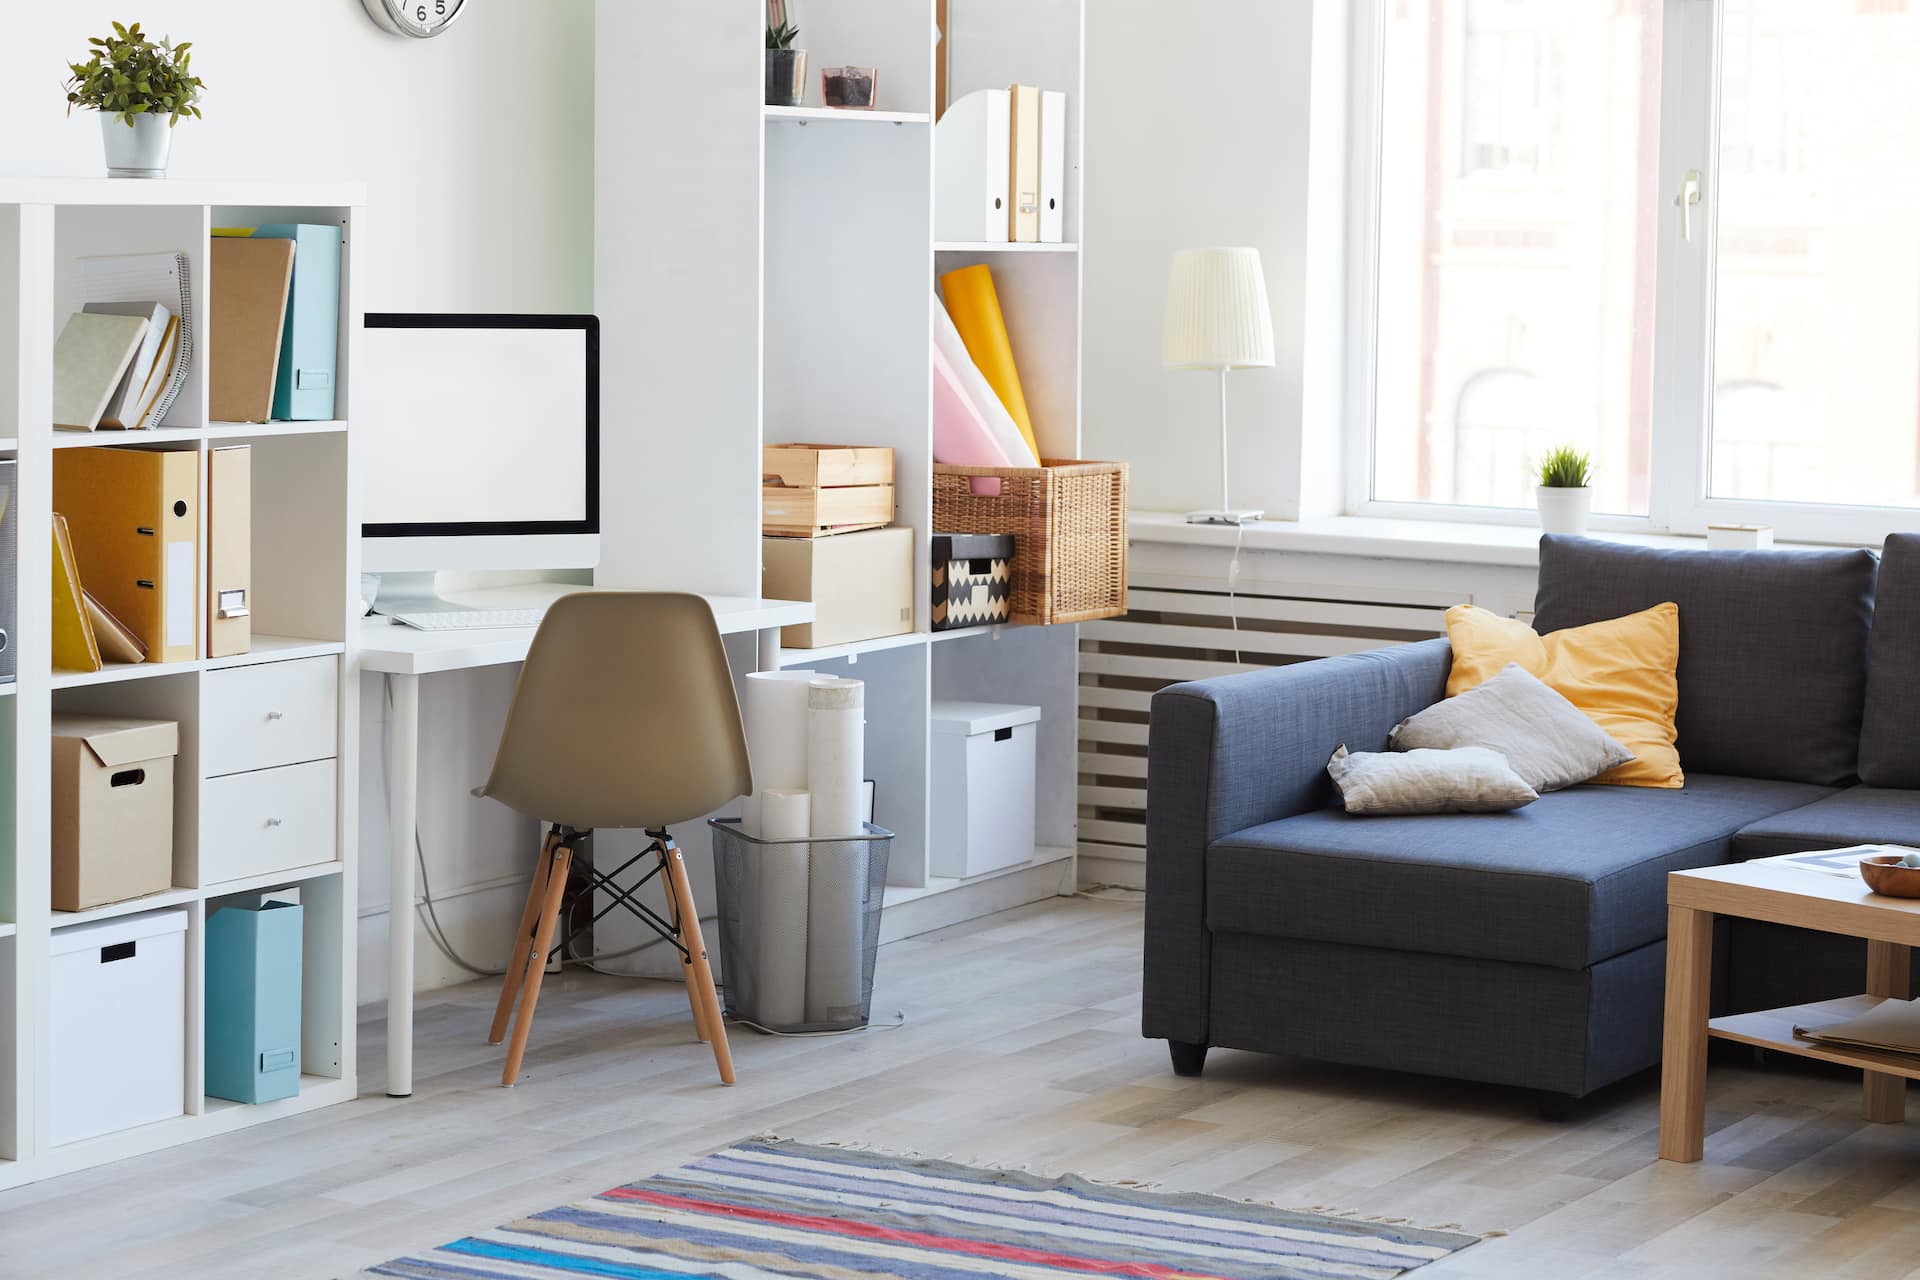 Domestic interion in white and blue with home workplace in living room, copy space